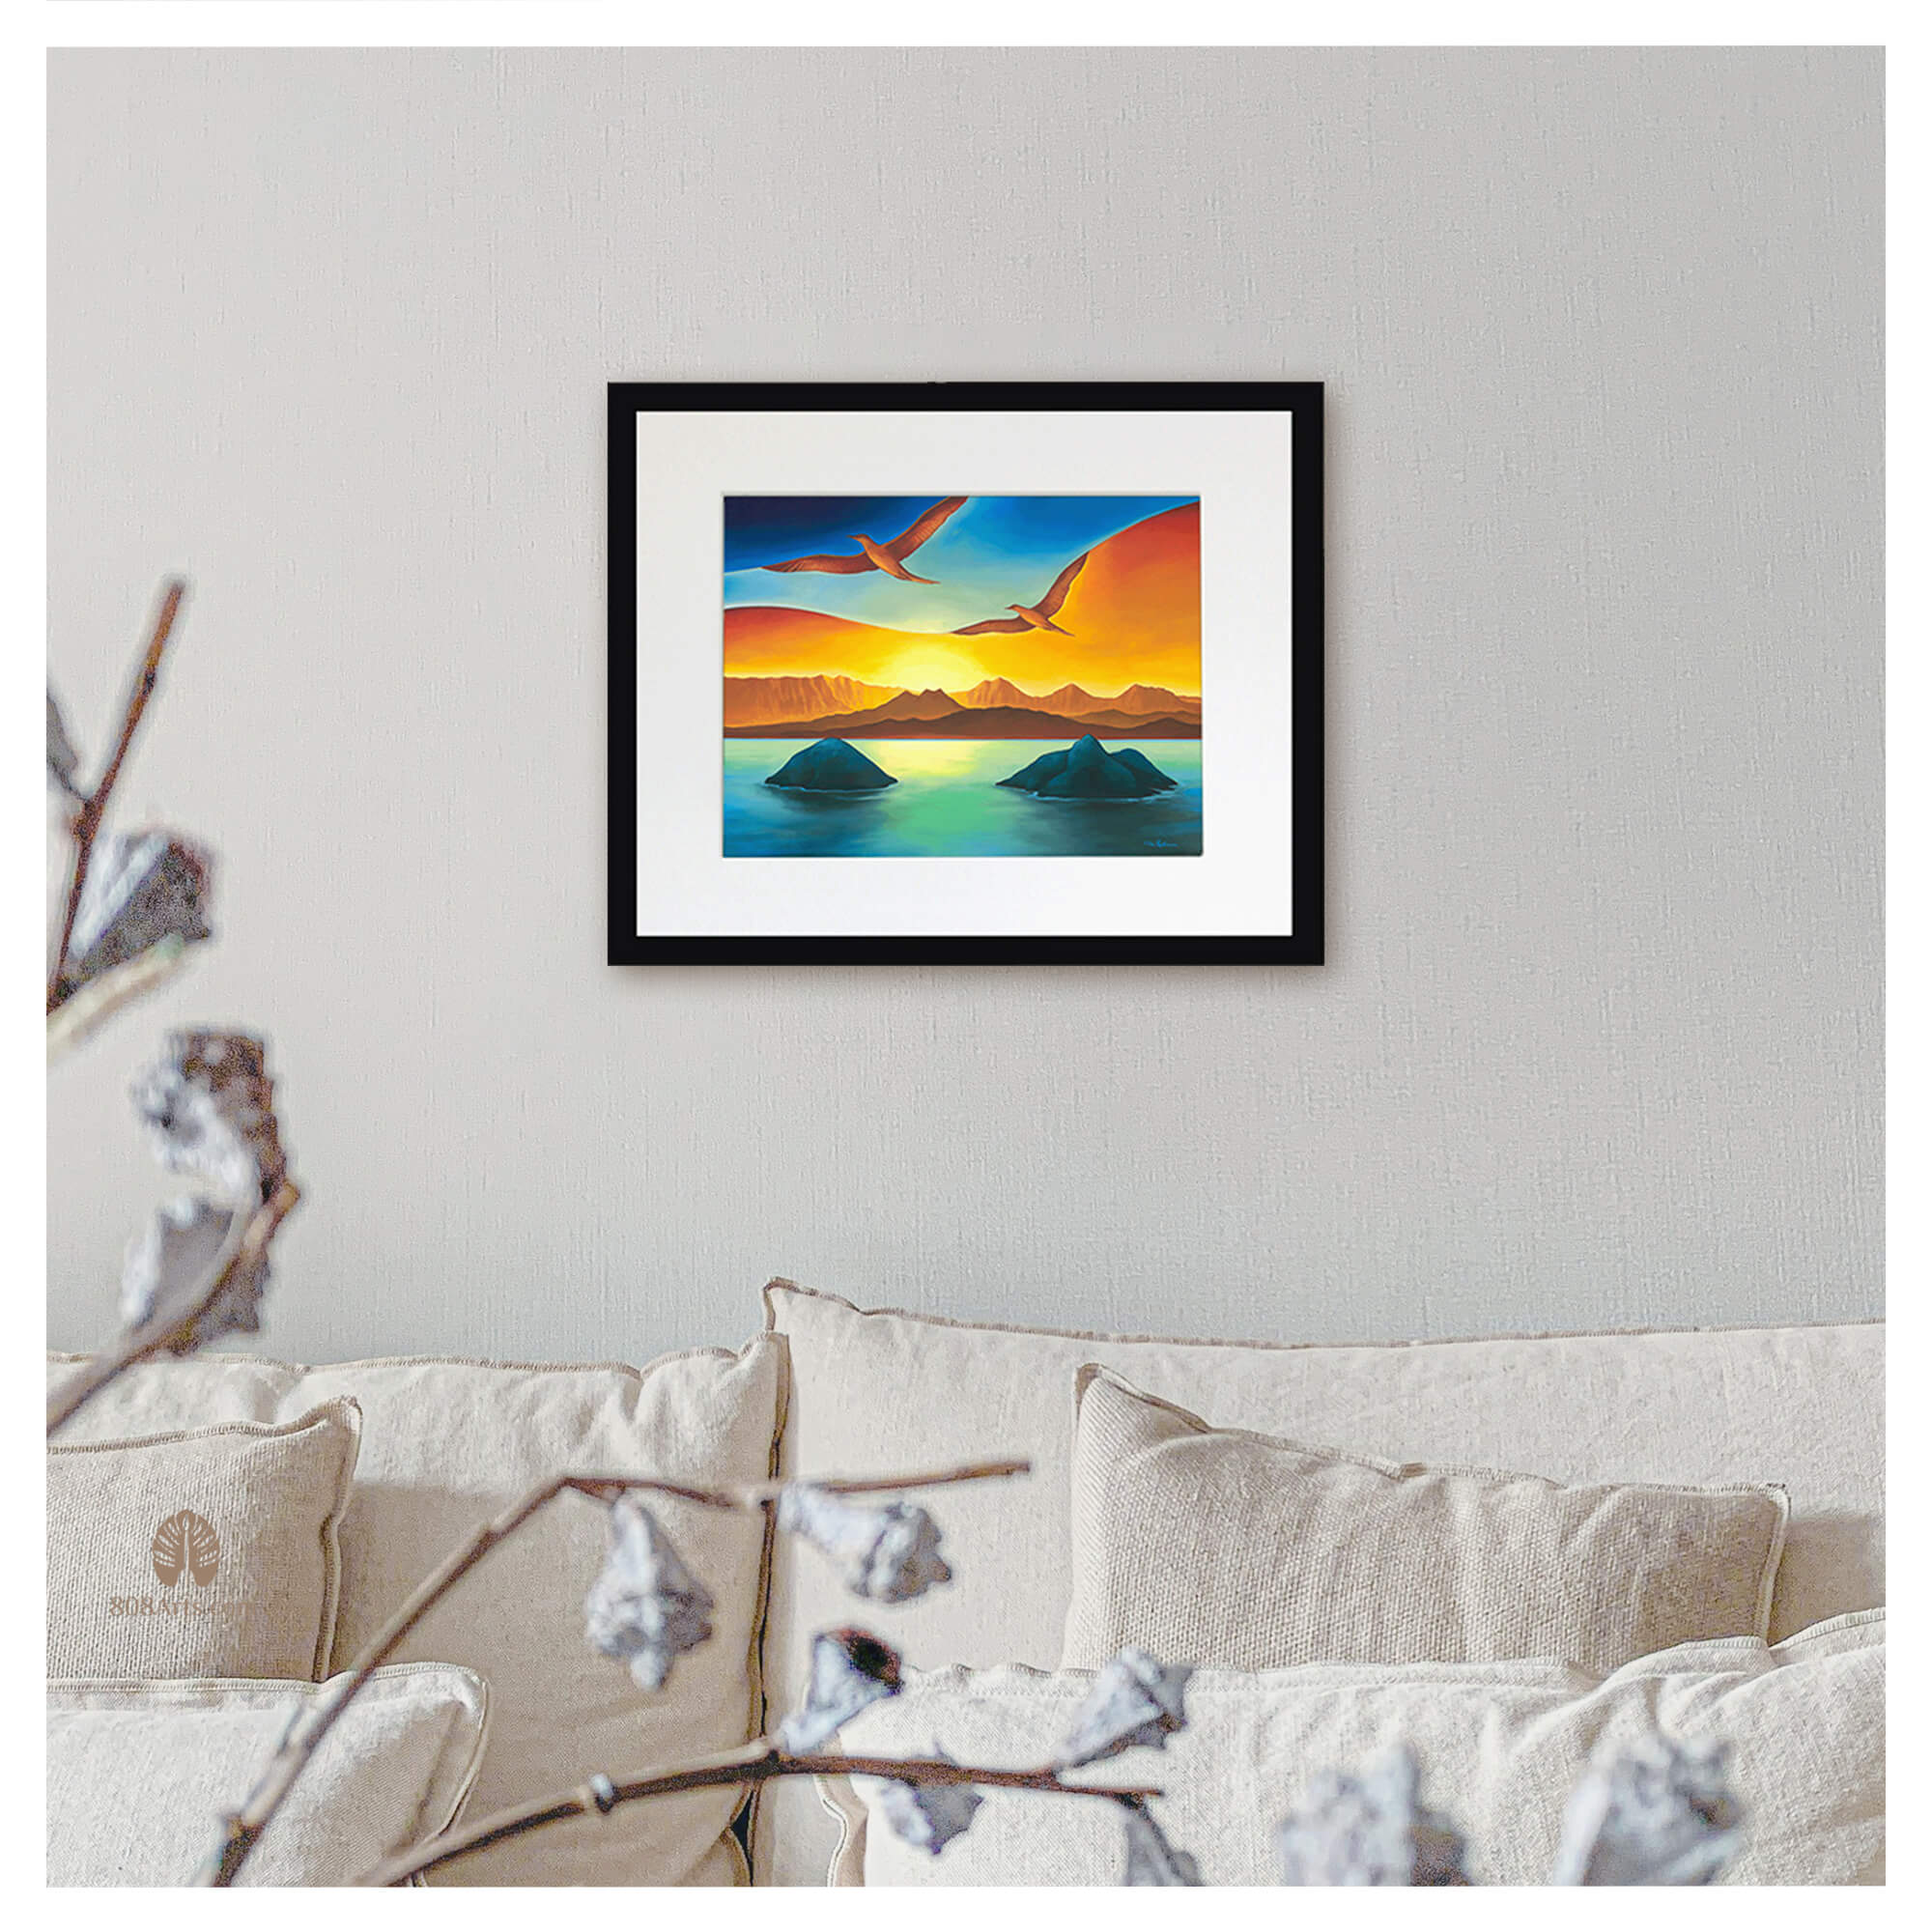 A sunset behind a tropical island by Hawaii artist Colin Redican